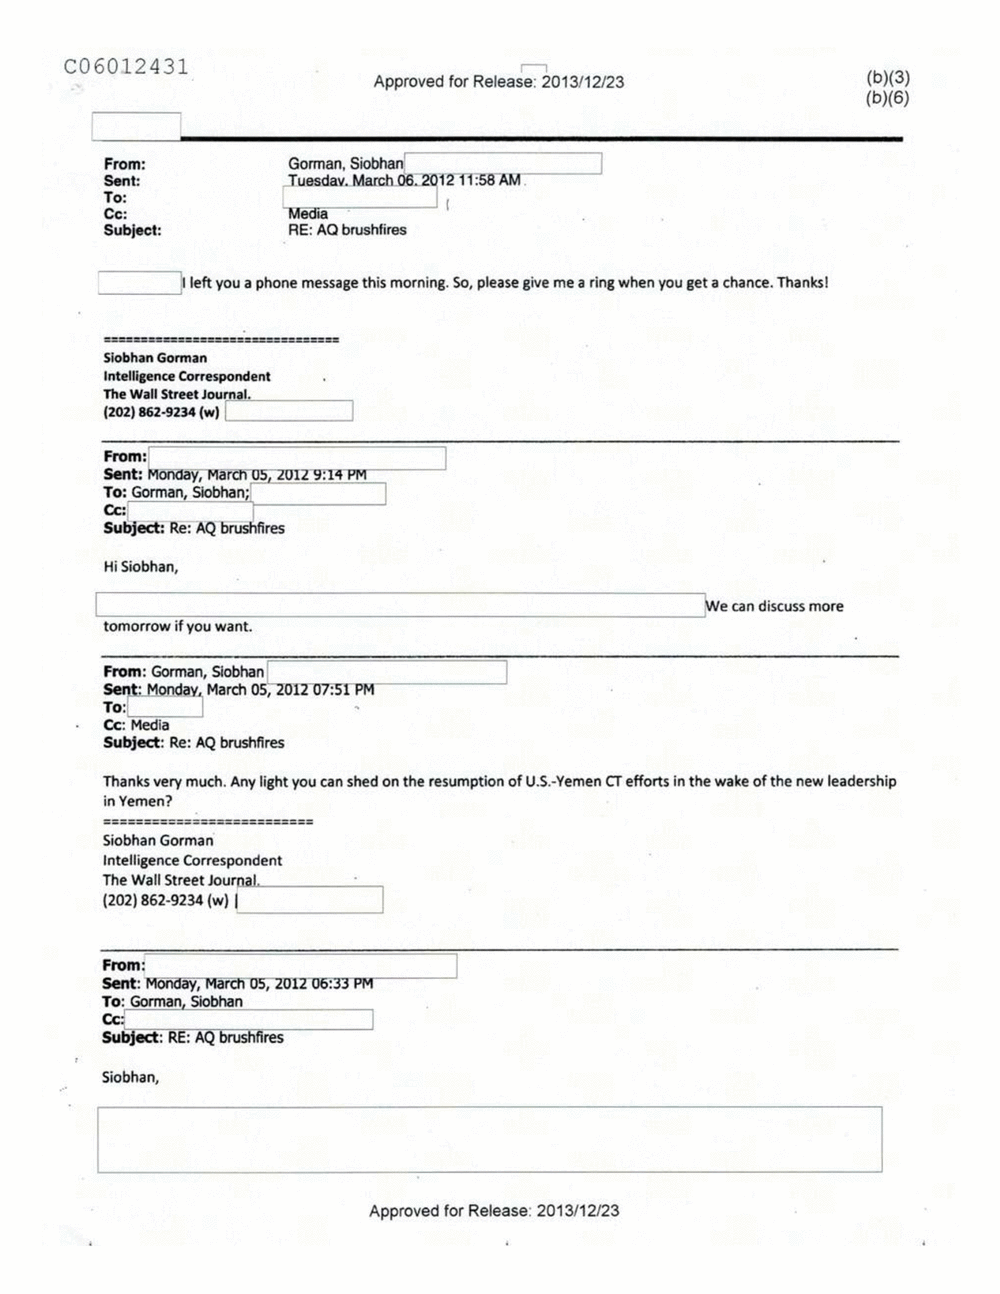 Page 8 from Email Correspondence Between Reporters and CIA Flacks